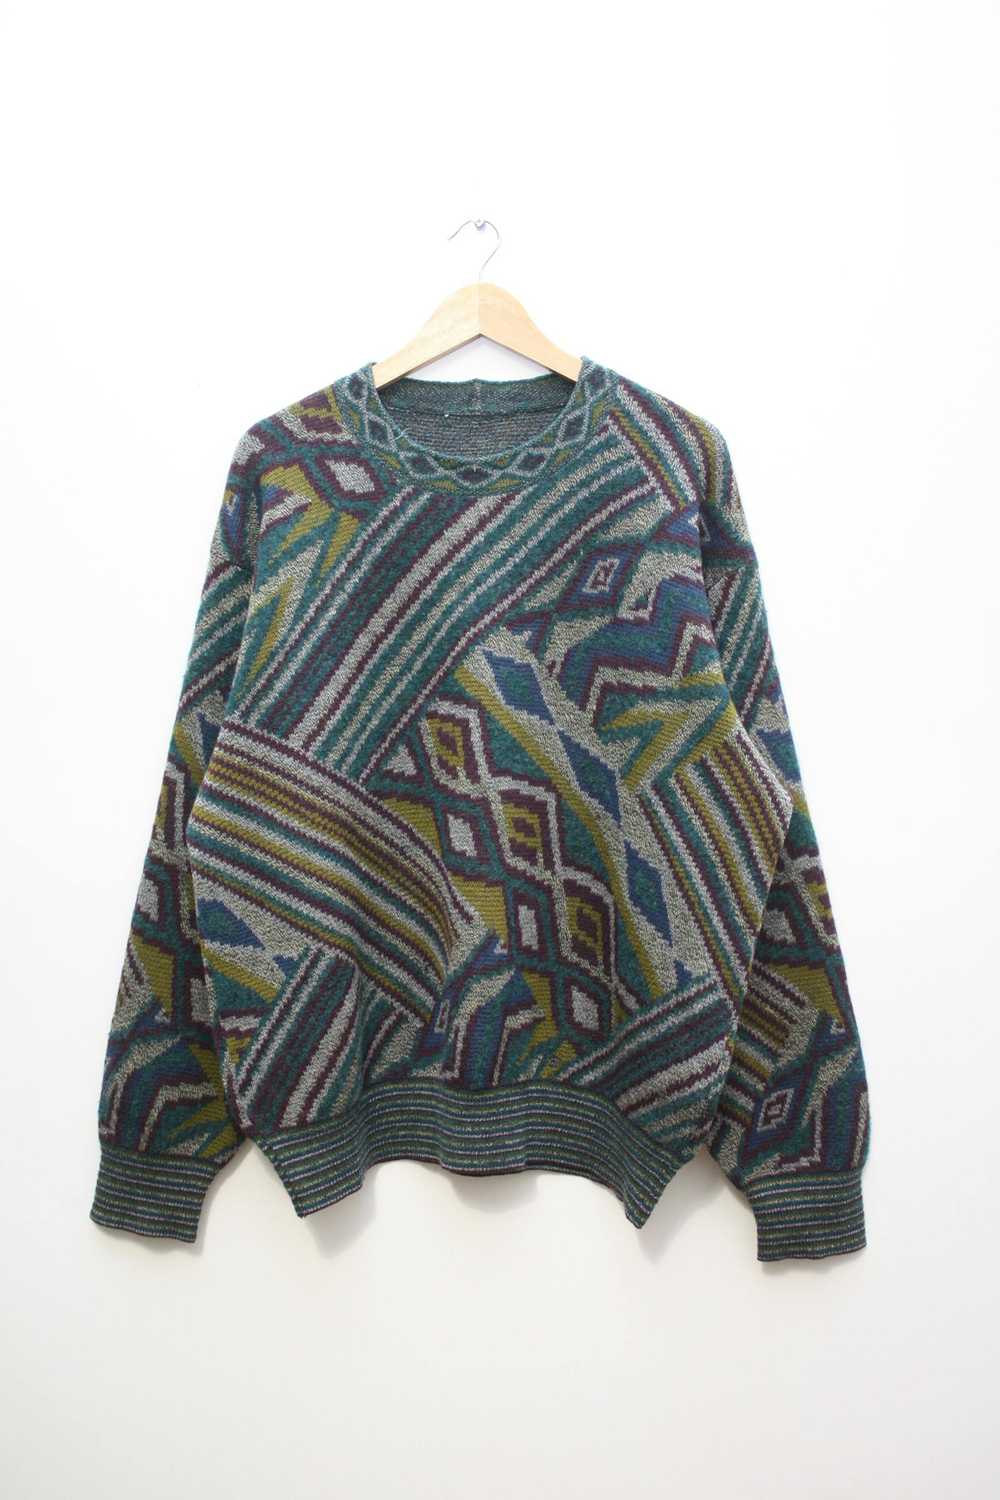 Missoni Missoni Sport Wool Abstract Knitted Sweat… - image 1